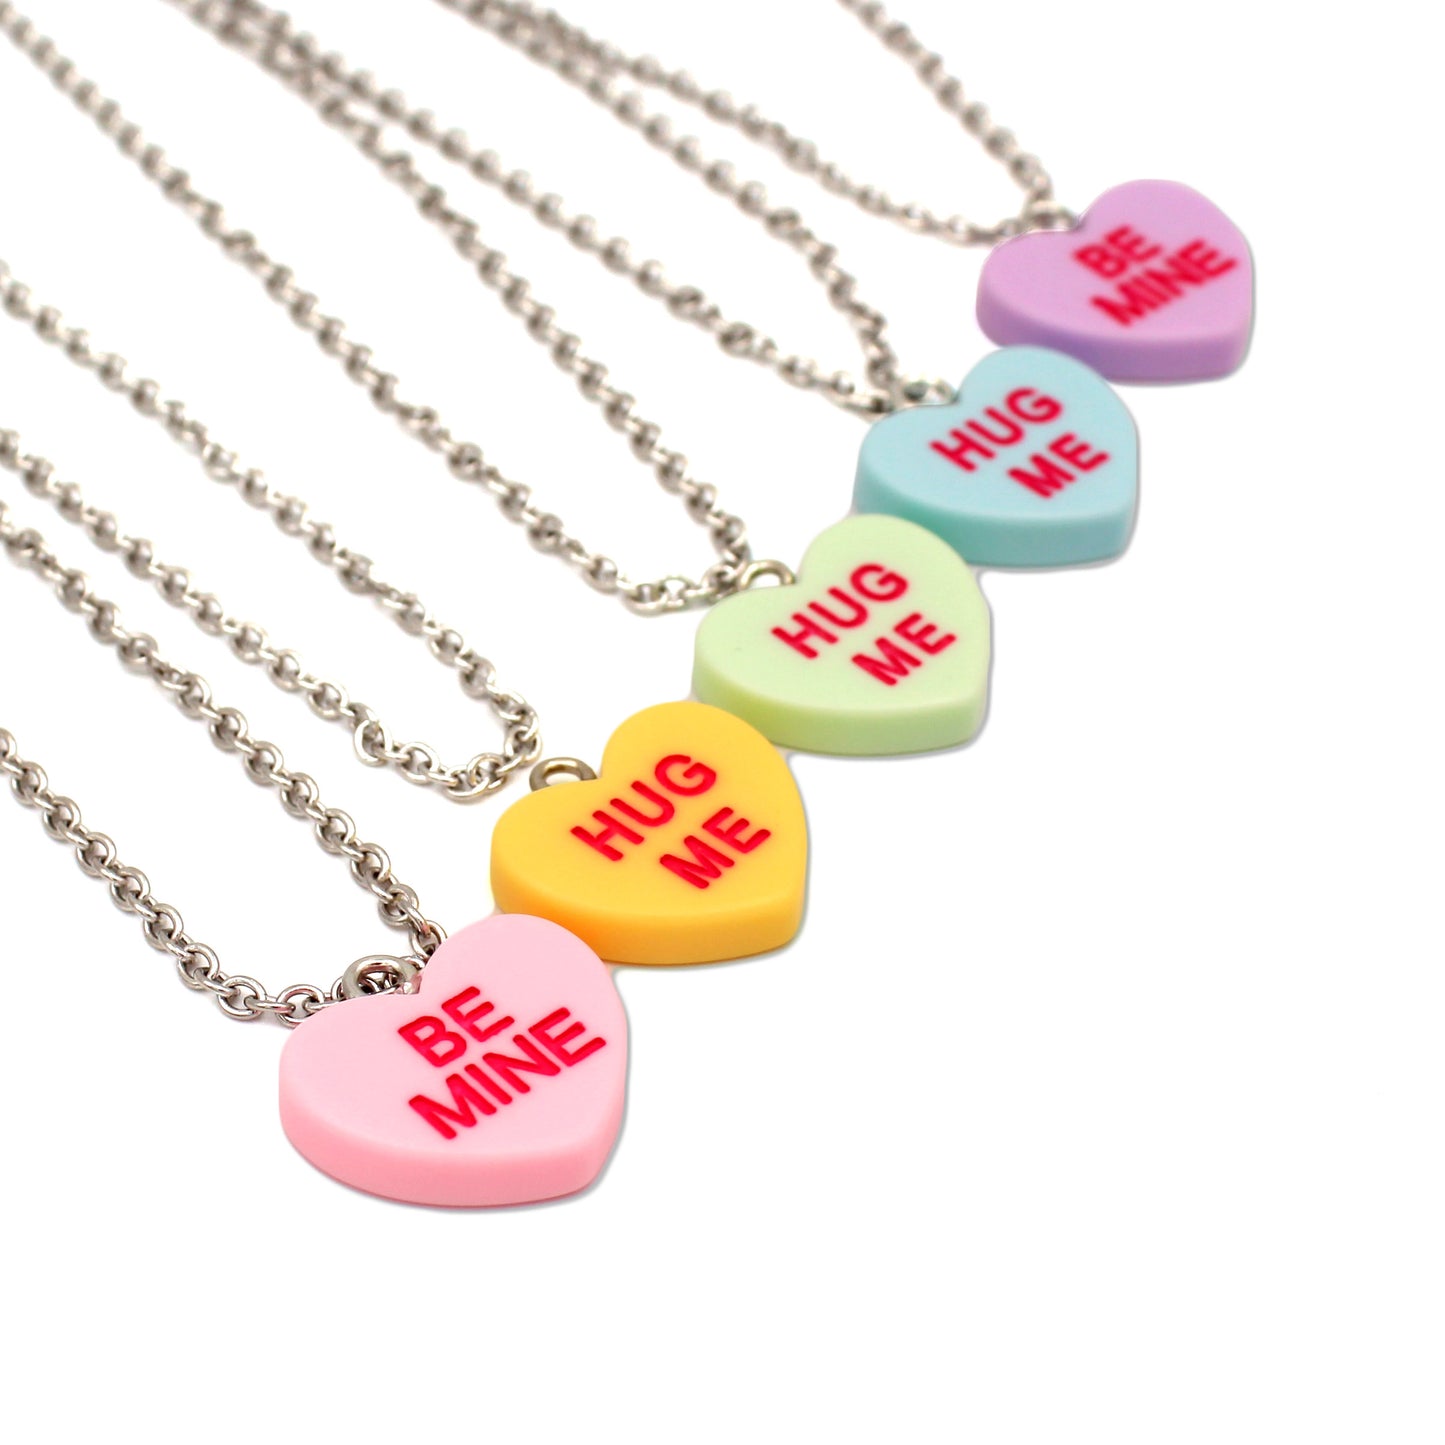 Conversation Candy Heart Necklace